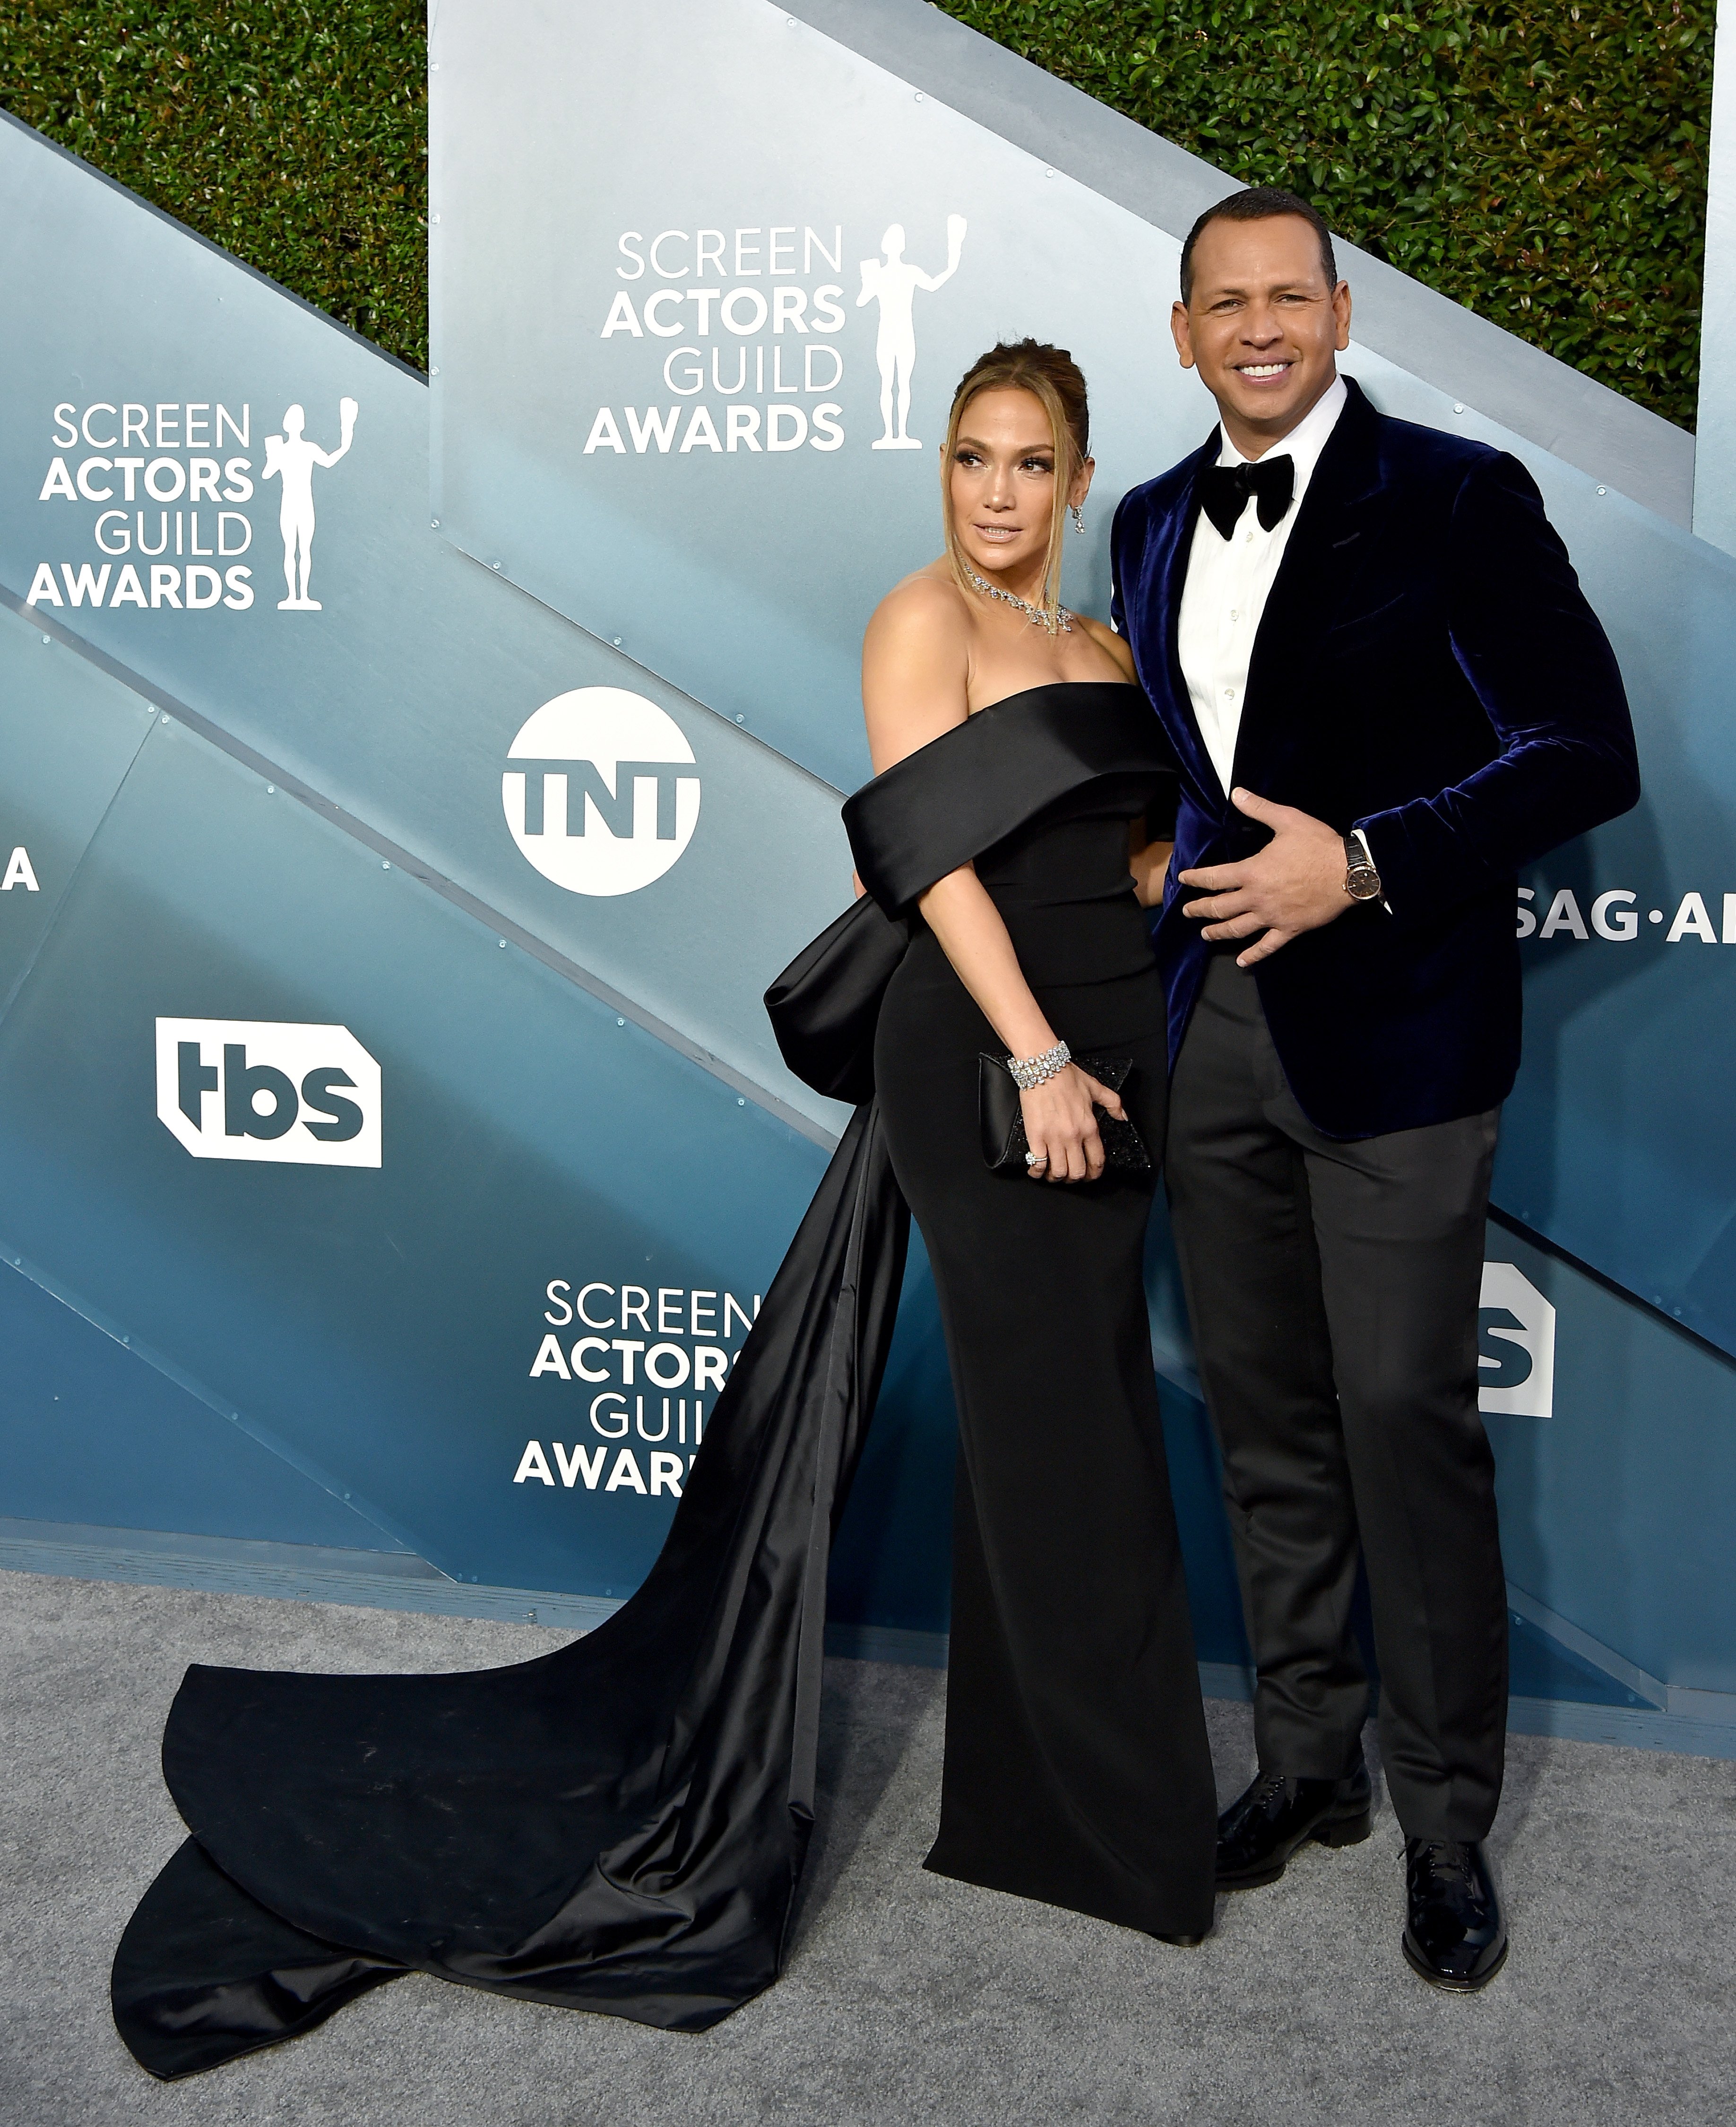 Jennifer Lopez and Alex Rodriguez attend the 26th Annual Screen Actors Guild Awards at The Shrine Auditorium on January 19, 2020, in Los Angeles, California. | Source: Getty Images.